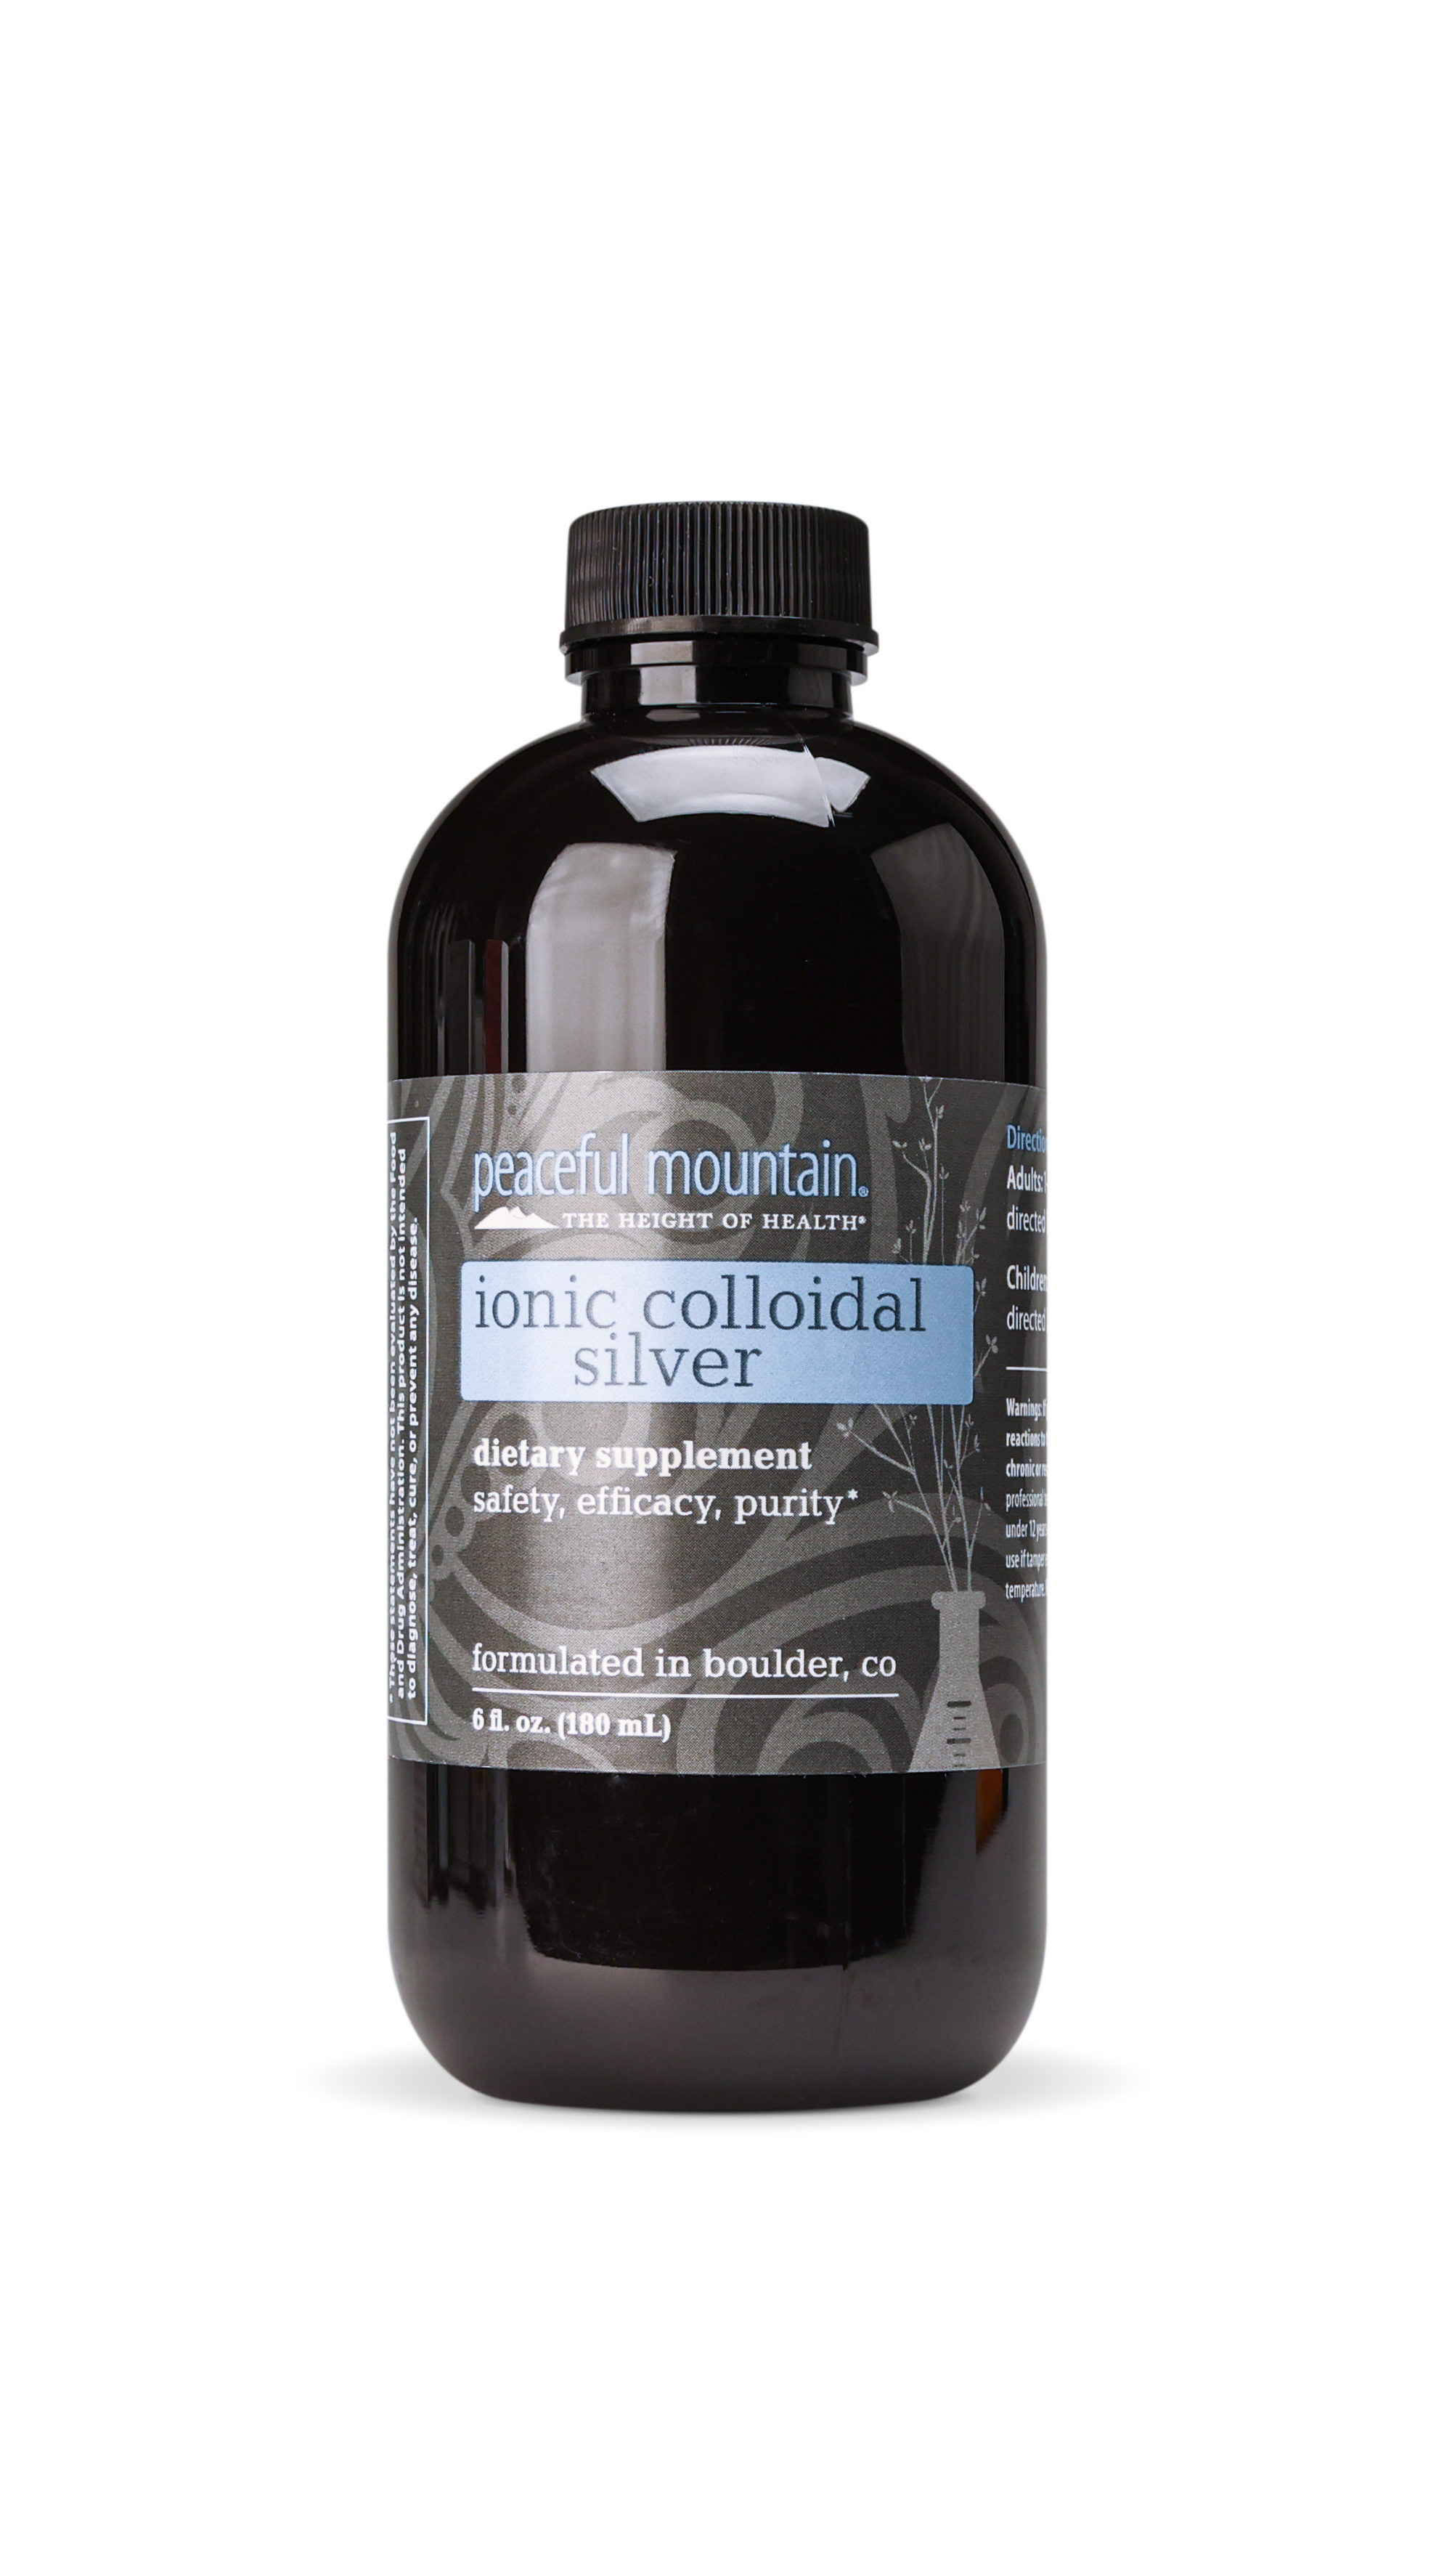 Ionic Colloidal Silver Supplement by Peaceful Mountain